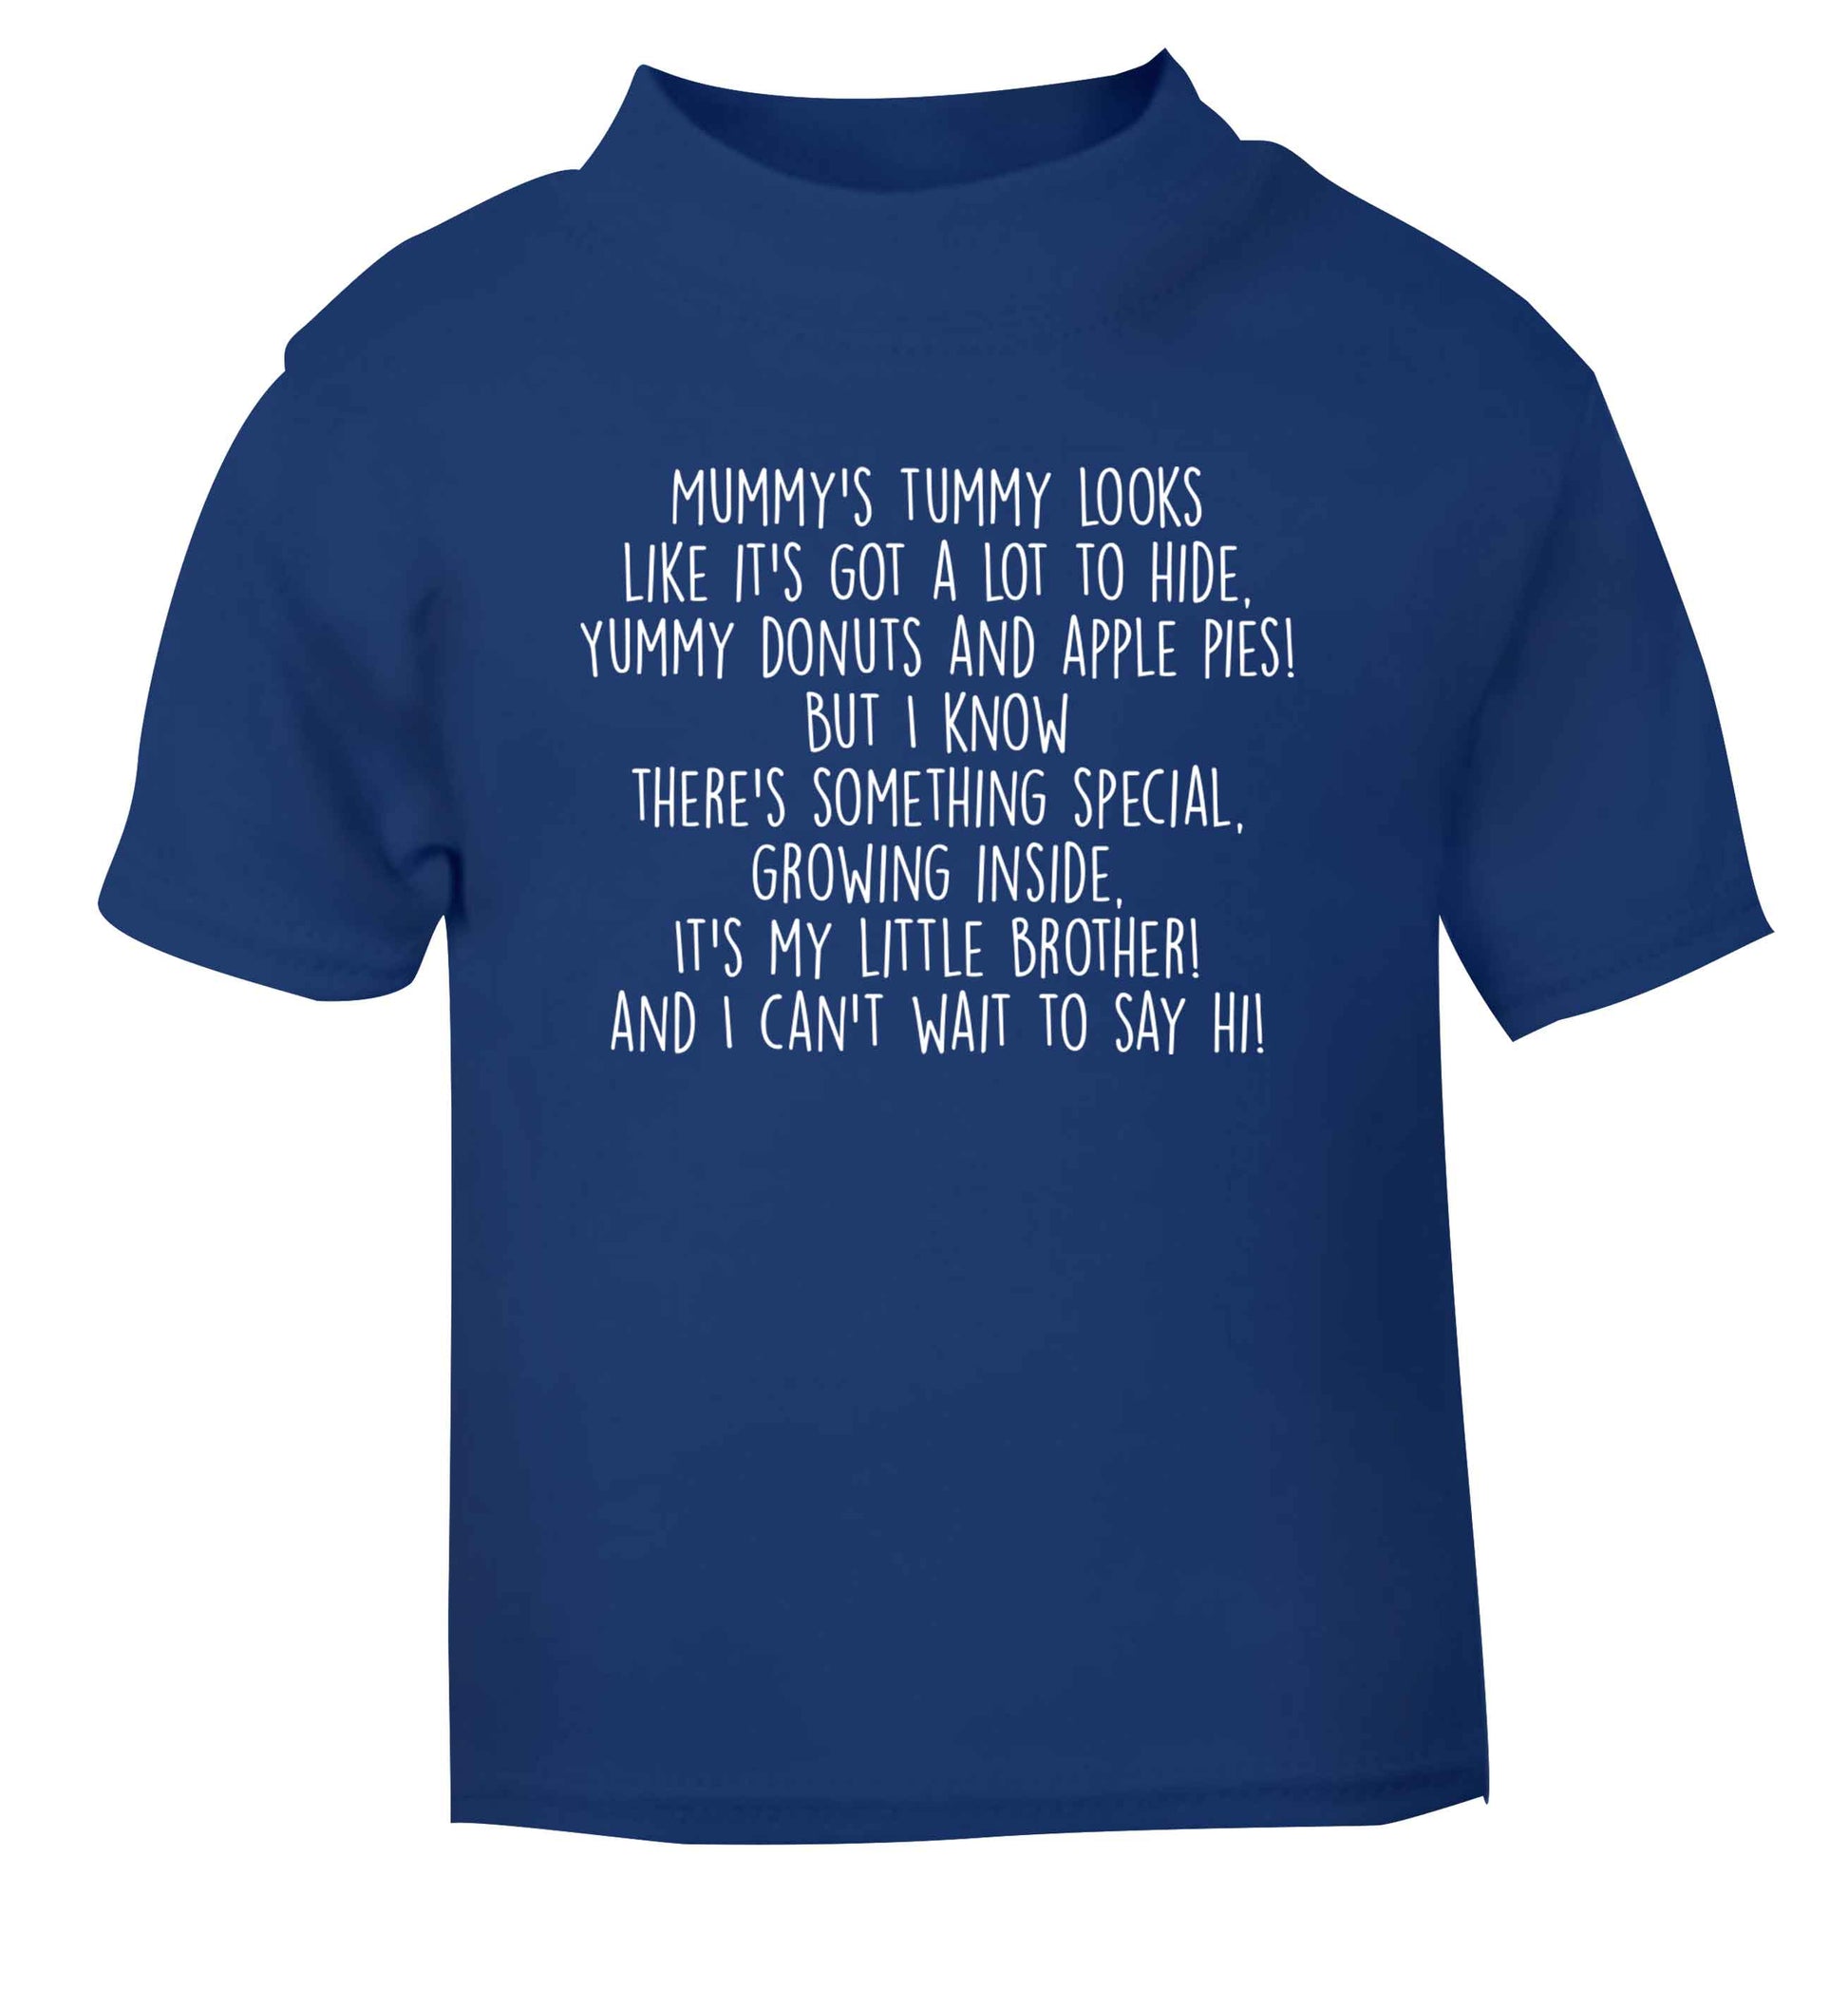 Something special growing inside it's my little brother I can't wait to say hi! blue Baby Toddler Tshirt 2 Years